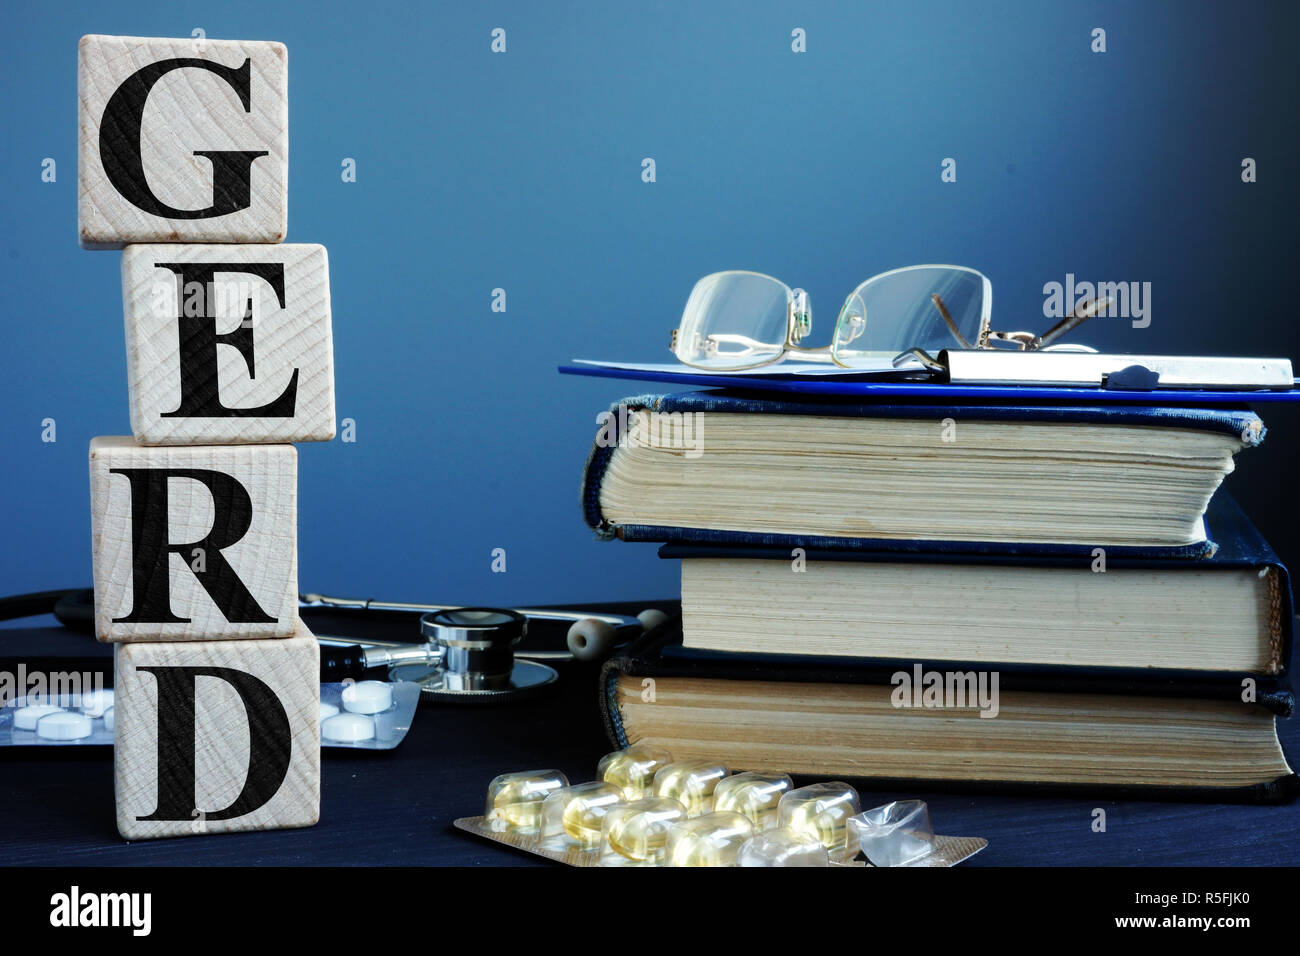 Word GERD Gastroesophageal reflux disease from cubes and books. Stock Photo